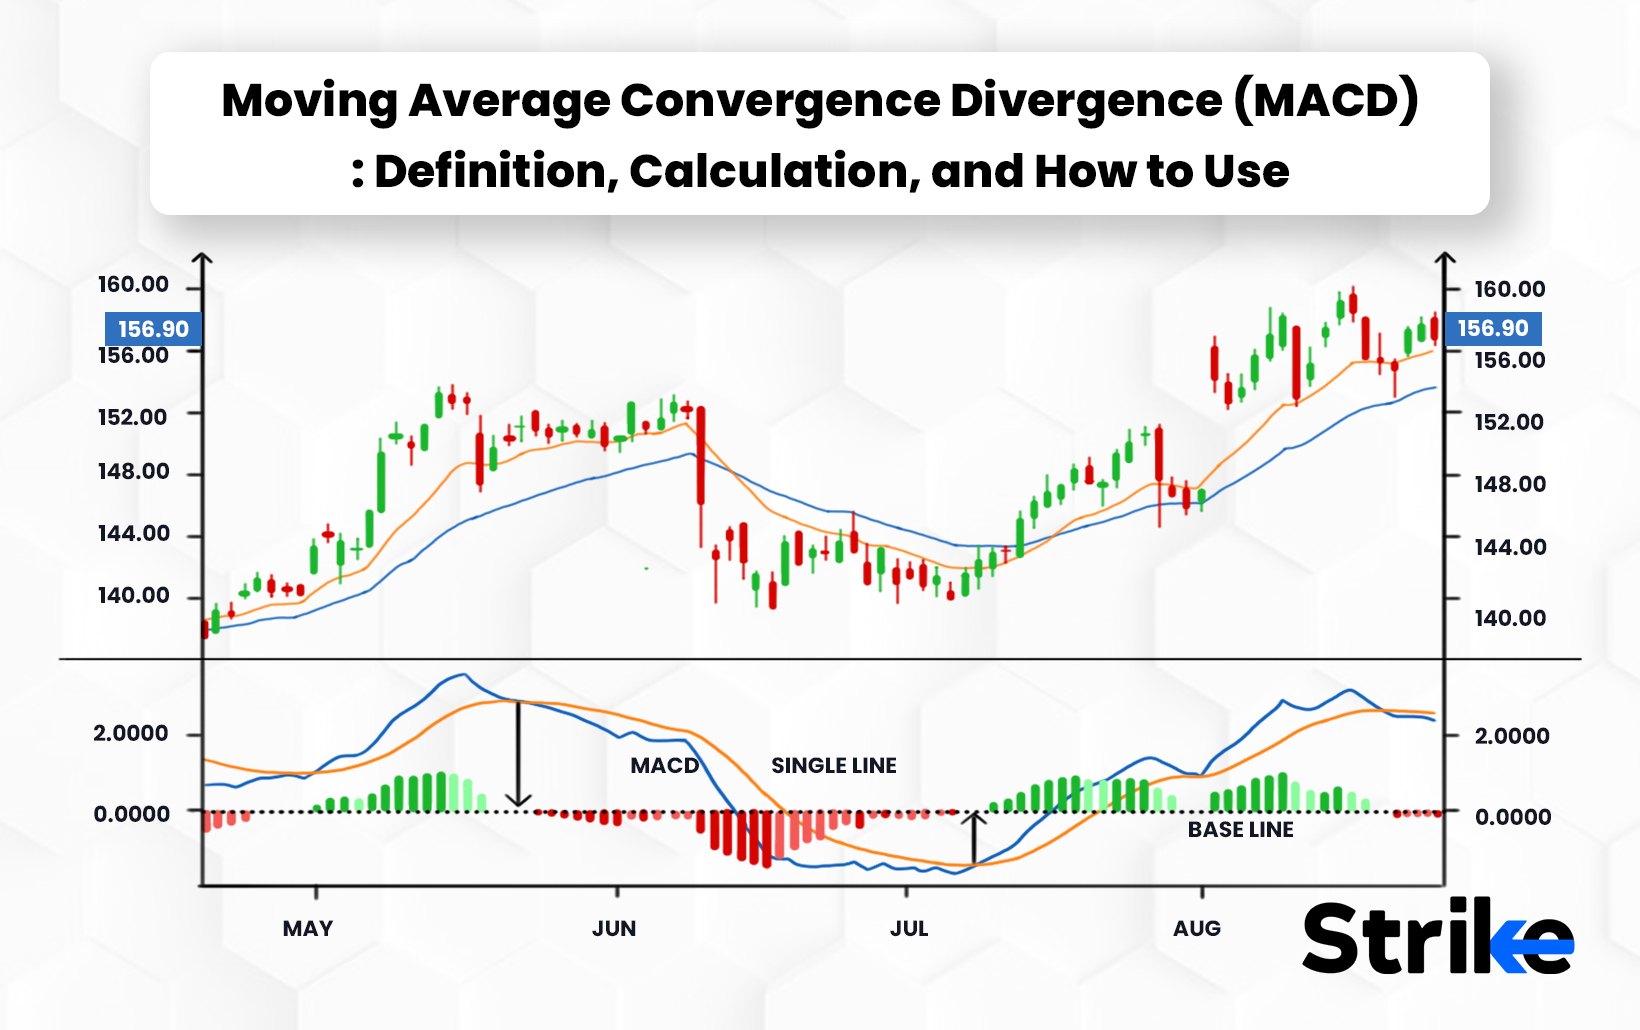 Moving Average Convergence Divergence (MACD): Definition, Calculation, and How to Use